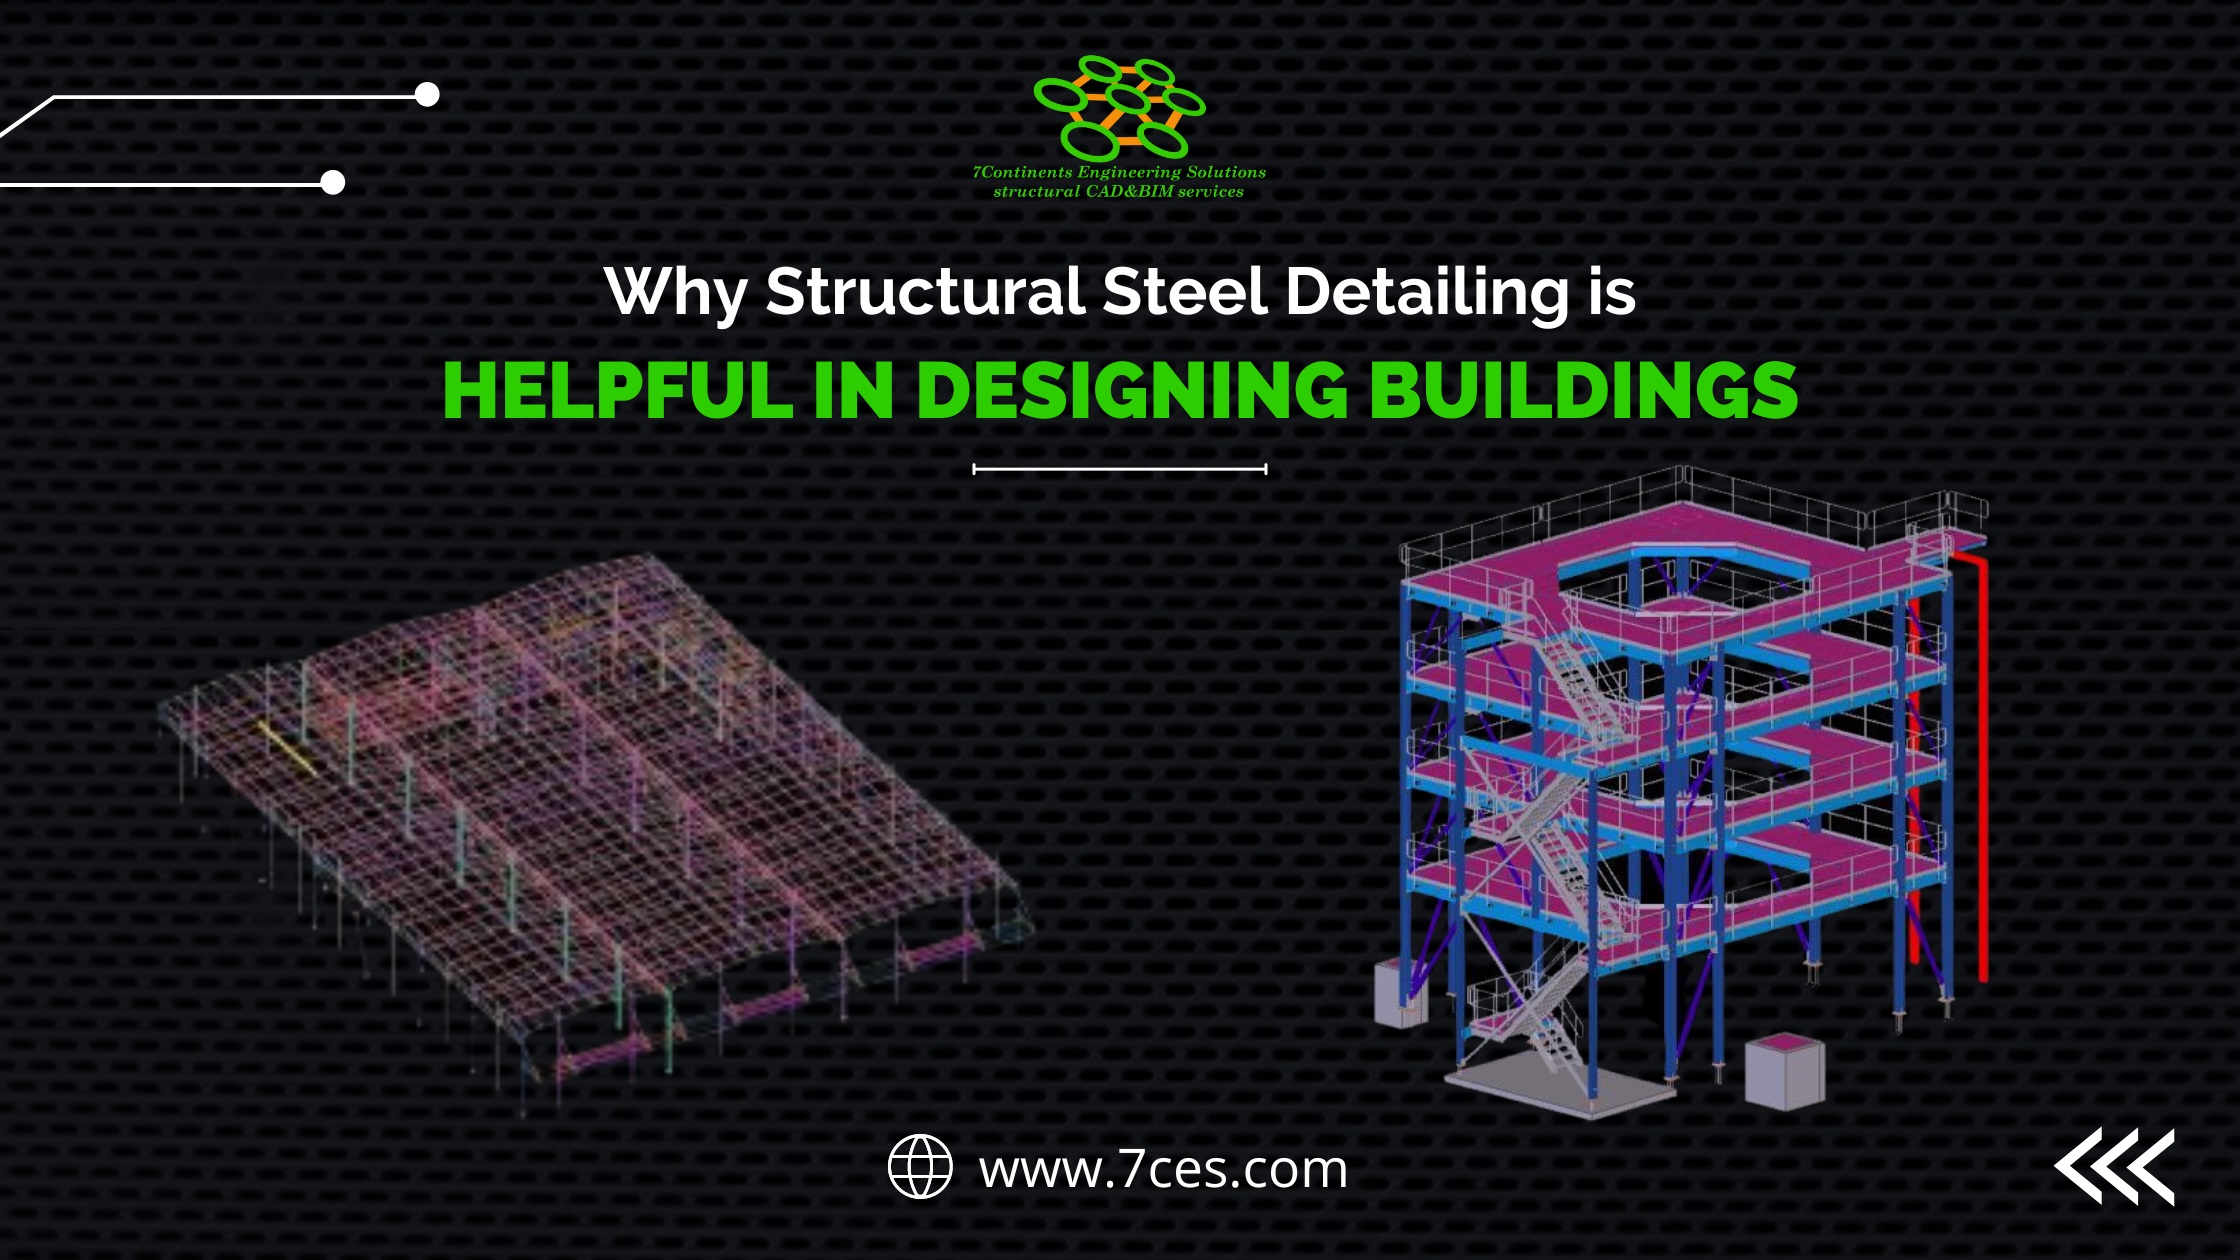 Why Structural Steel Detailing is helpful in Designing Buildings